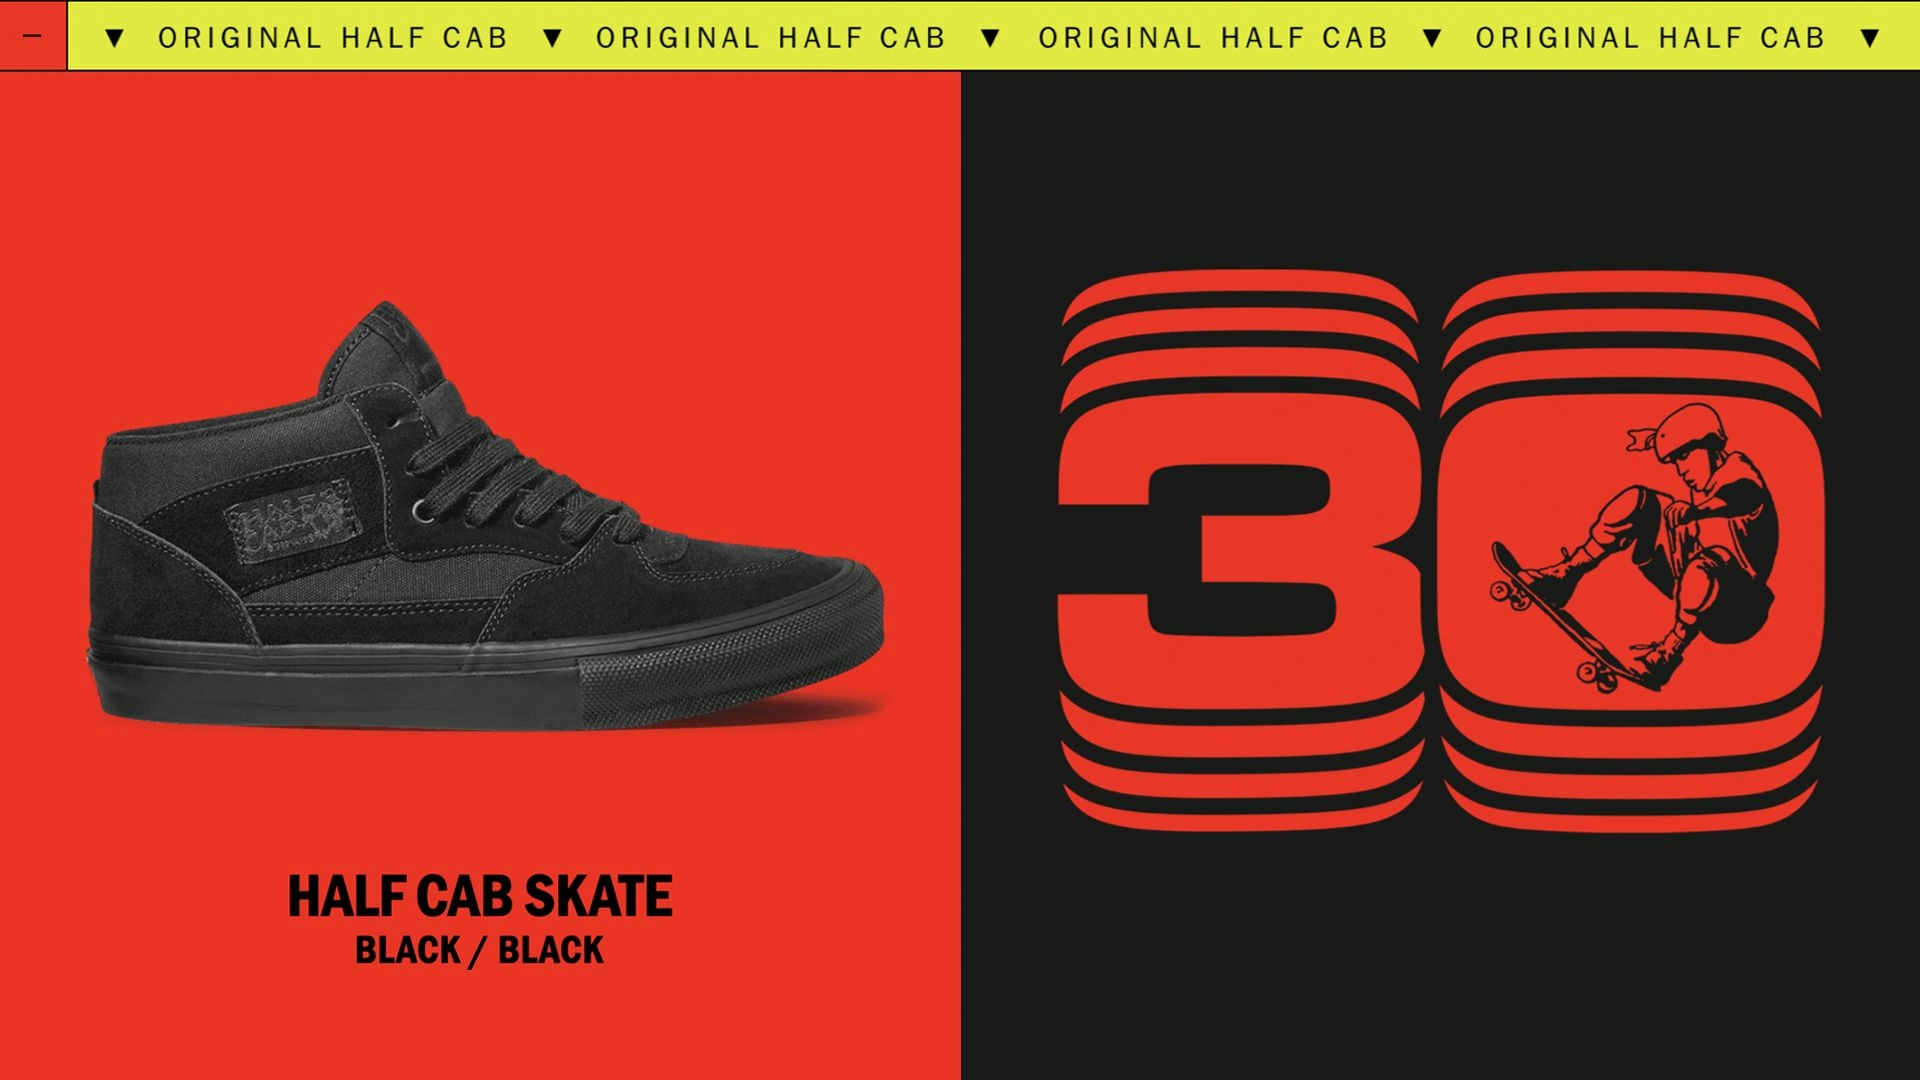 Maketing landing page design for the Vans 30 Years of the Half Cab Campaign